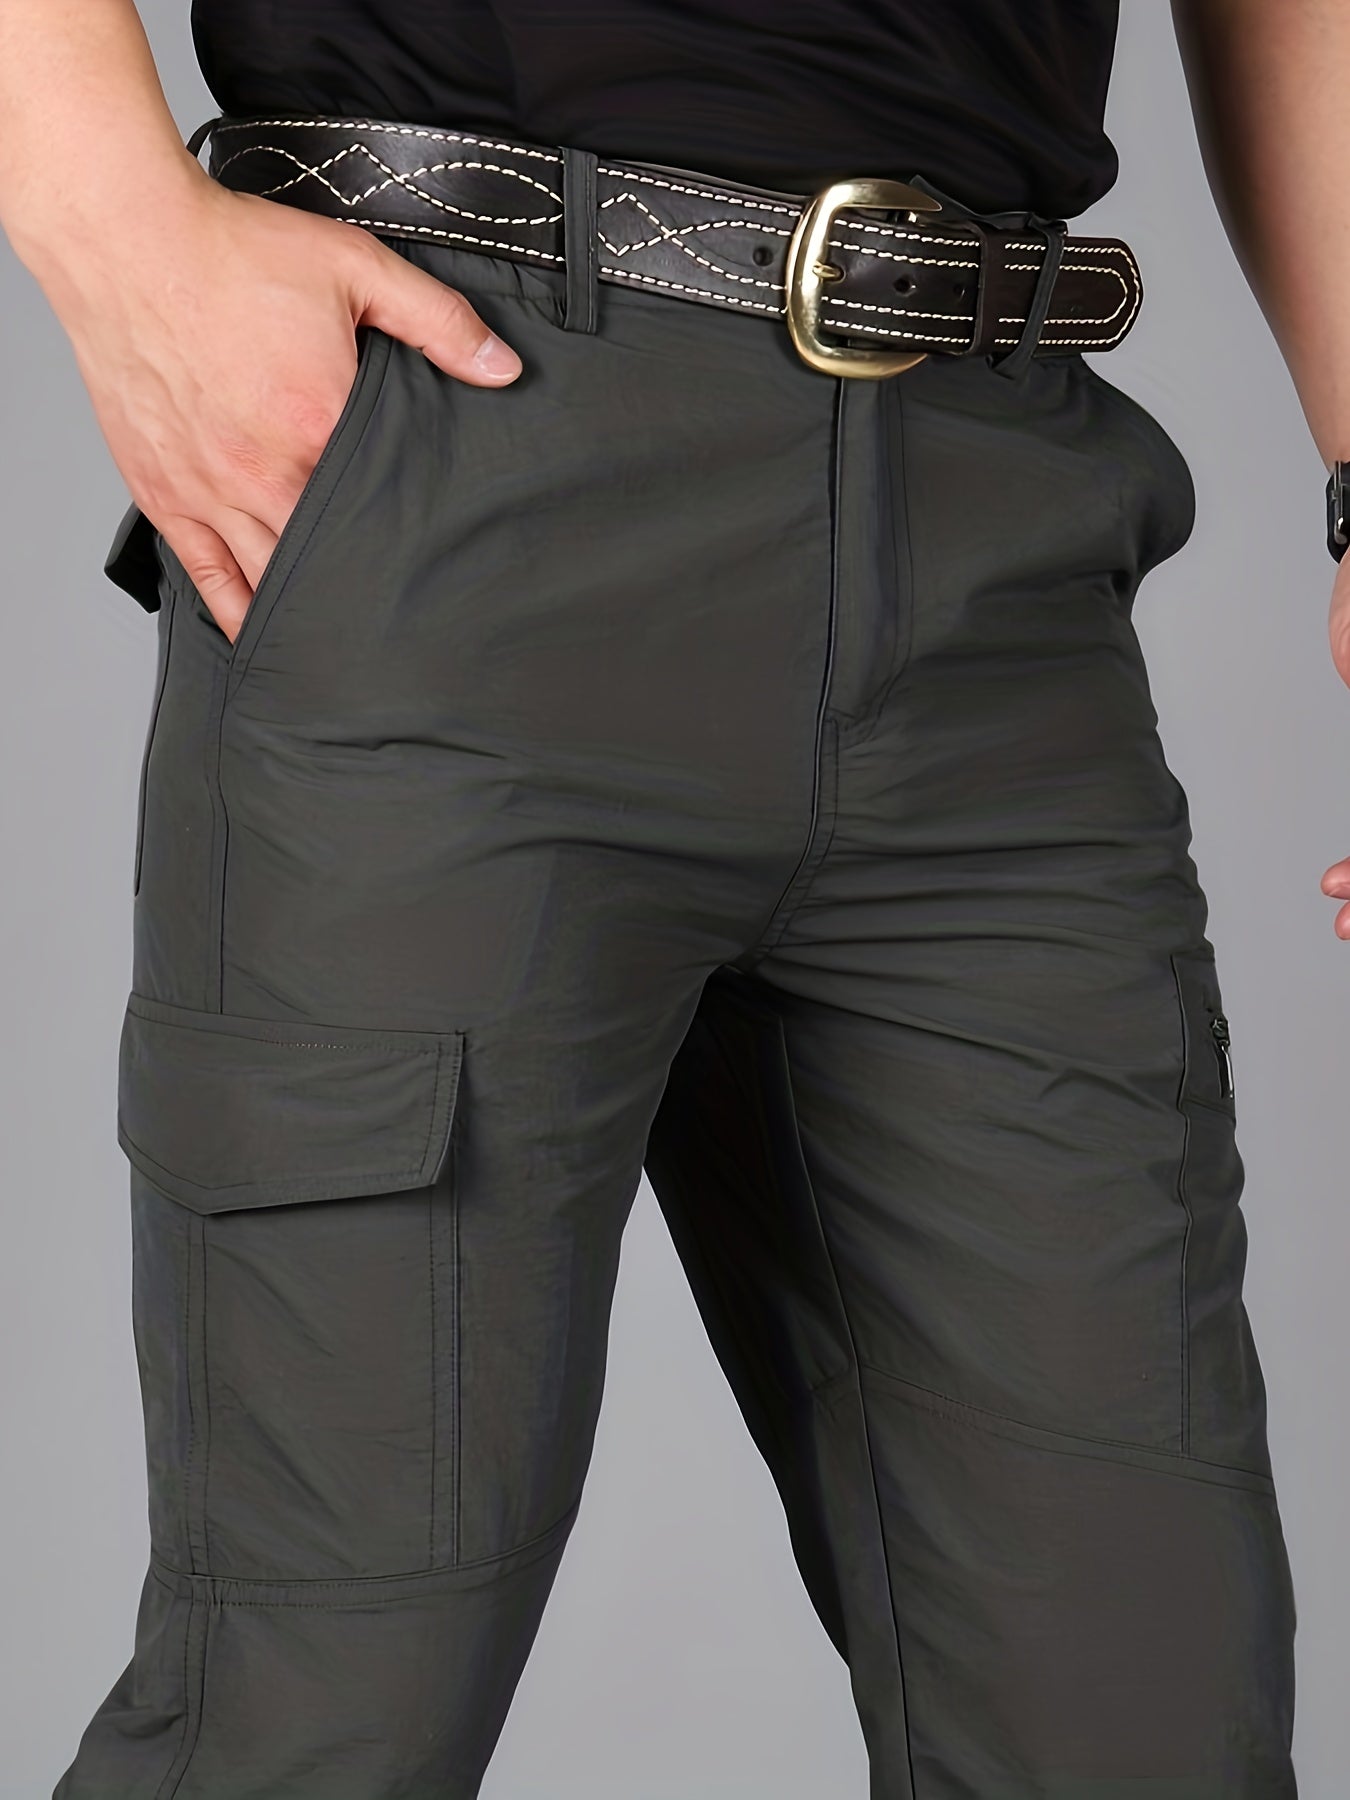 Men's Flap Pocket Cargo Pants, Drawstring Comfy Active Stretch Breathable Trousers For Outdoor Activities